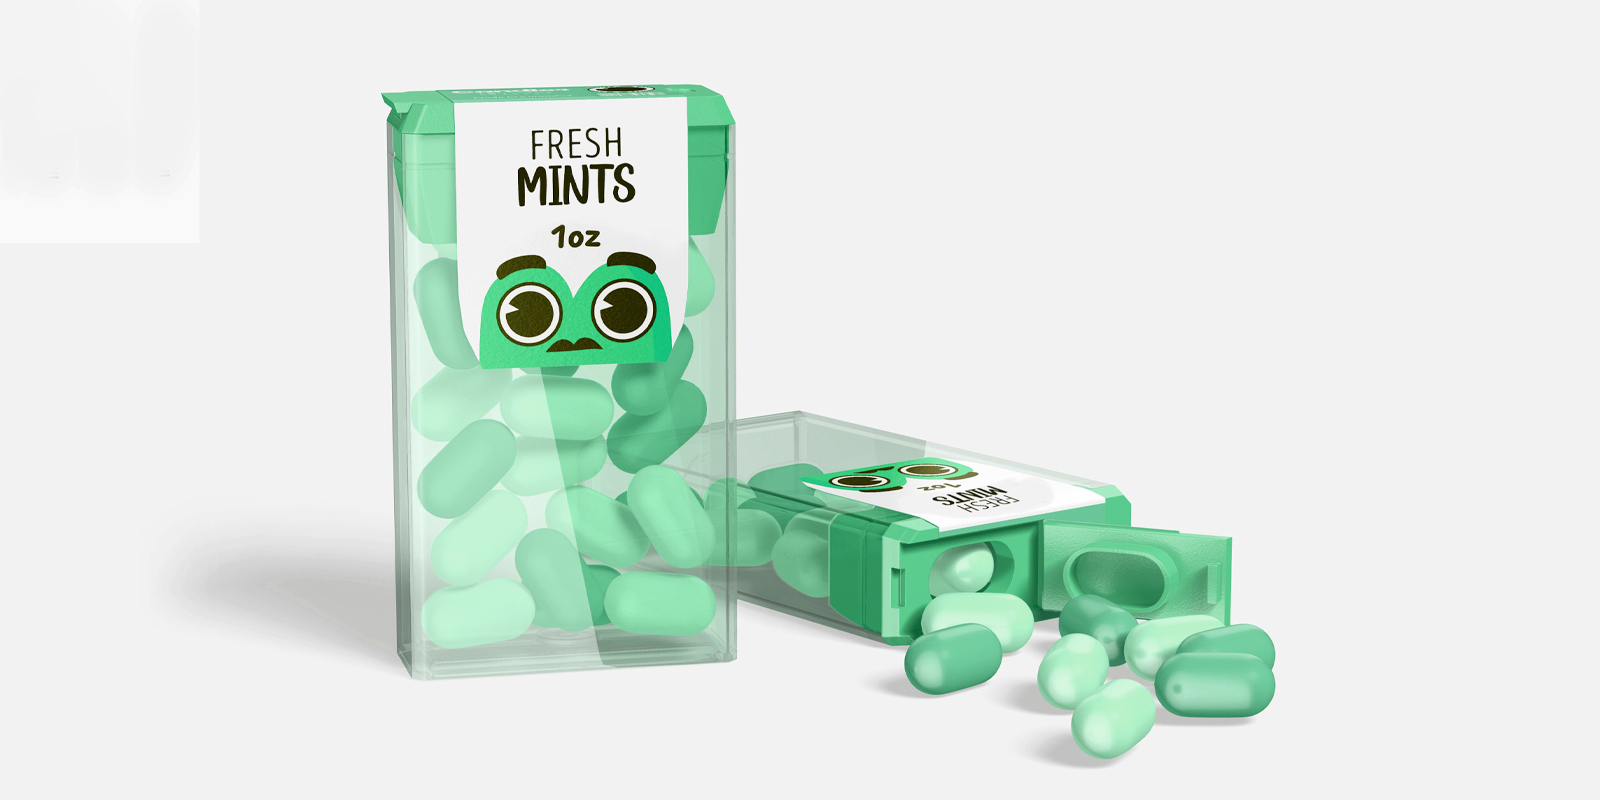 Mints in Hobart - Print with Pagerr